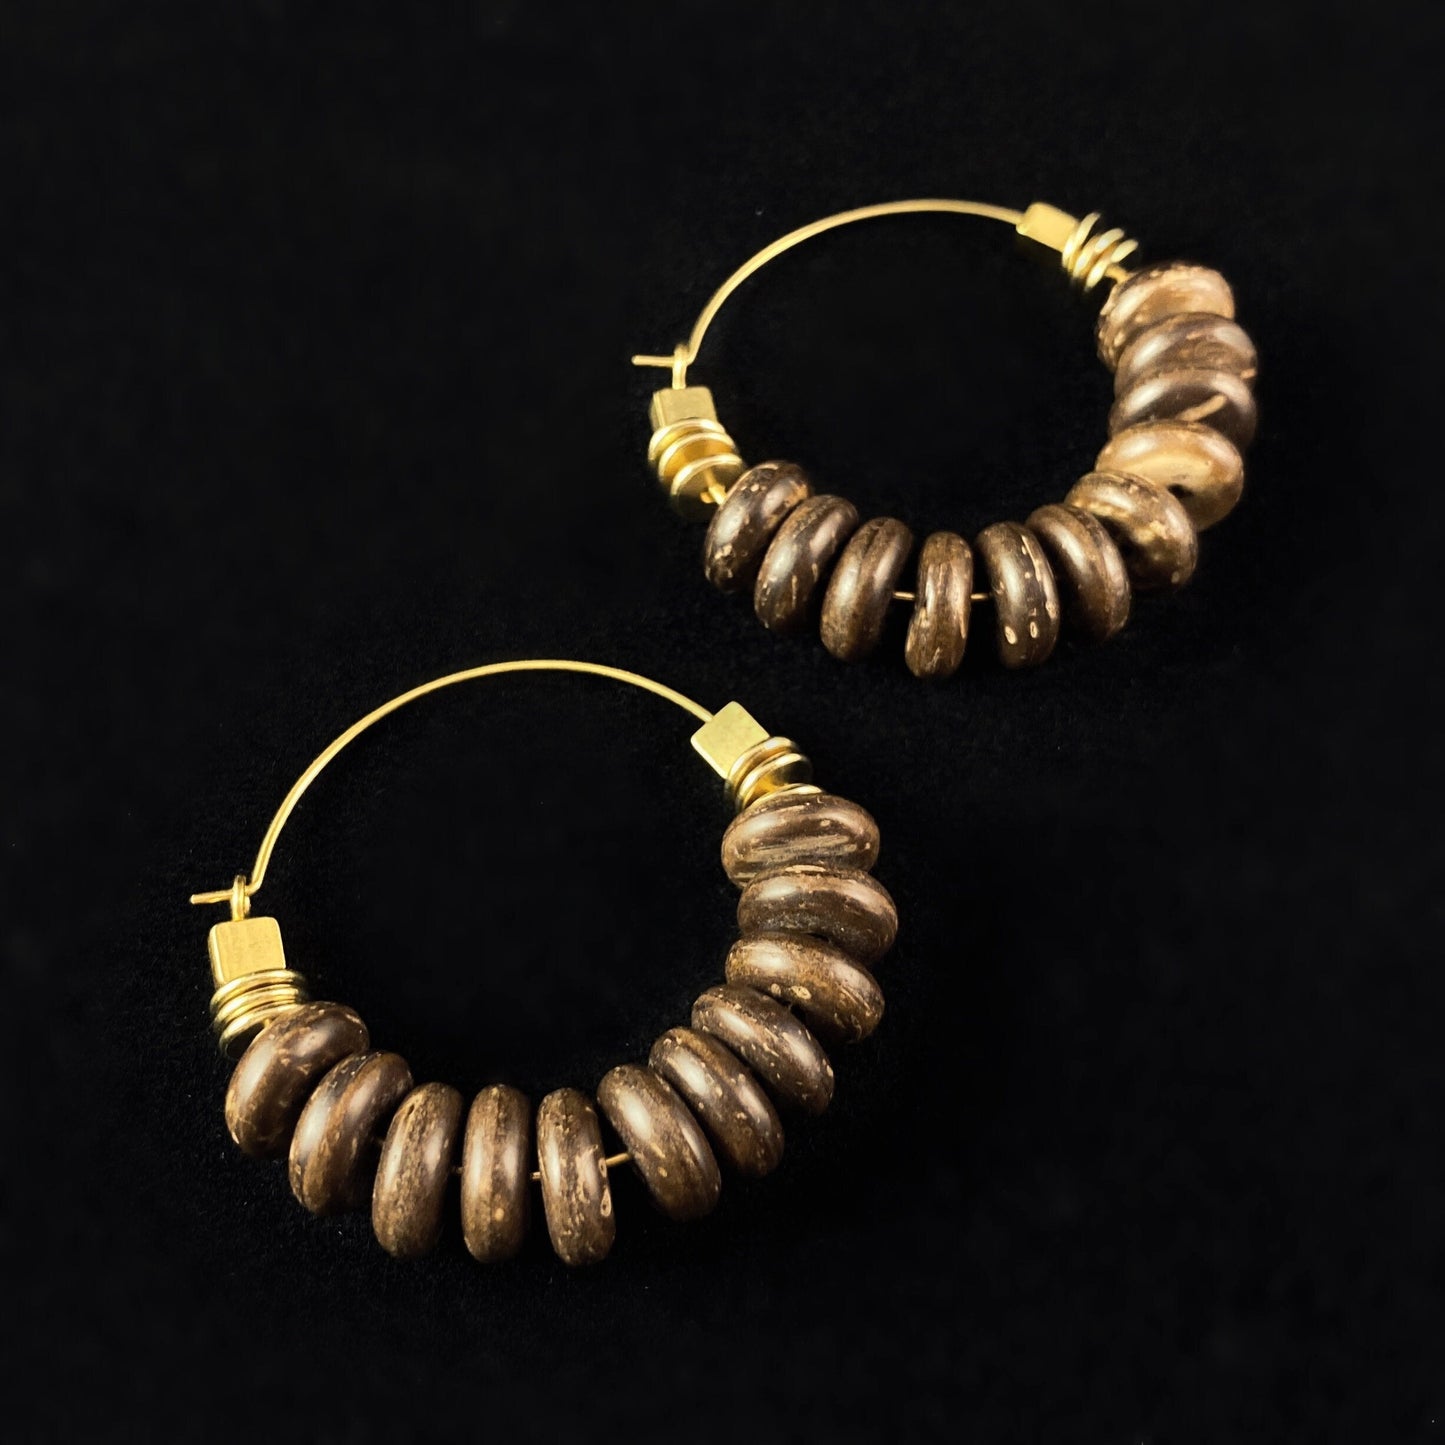 Gold Geometric Art Deco Hoop Earrings  - 18kt Gold Over Brass with Coco Wood Beads, David Aubrey Jewelry